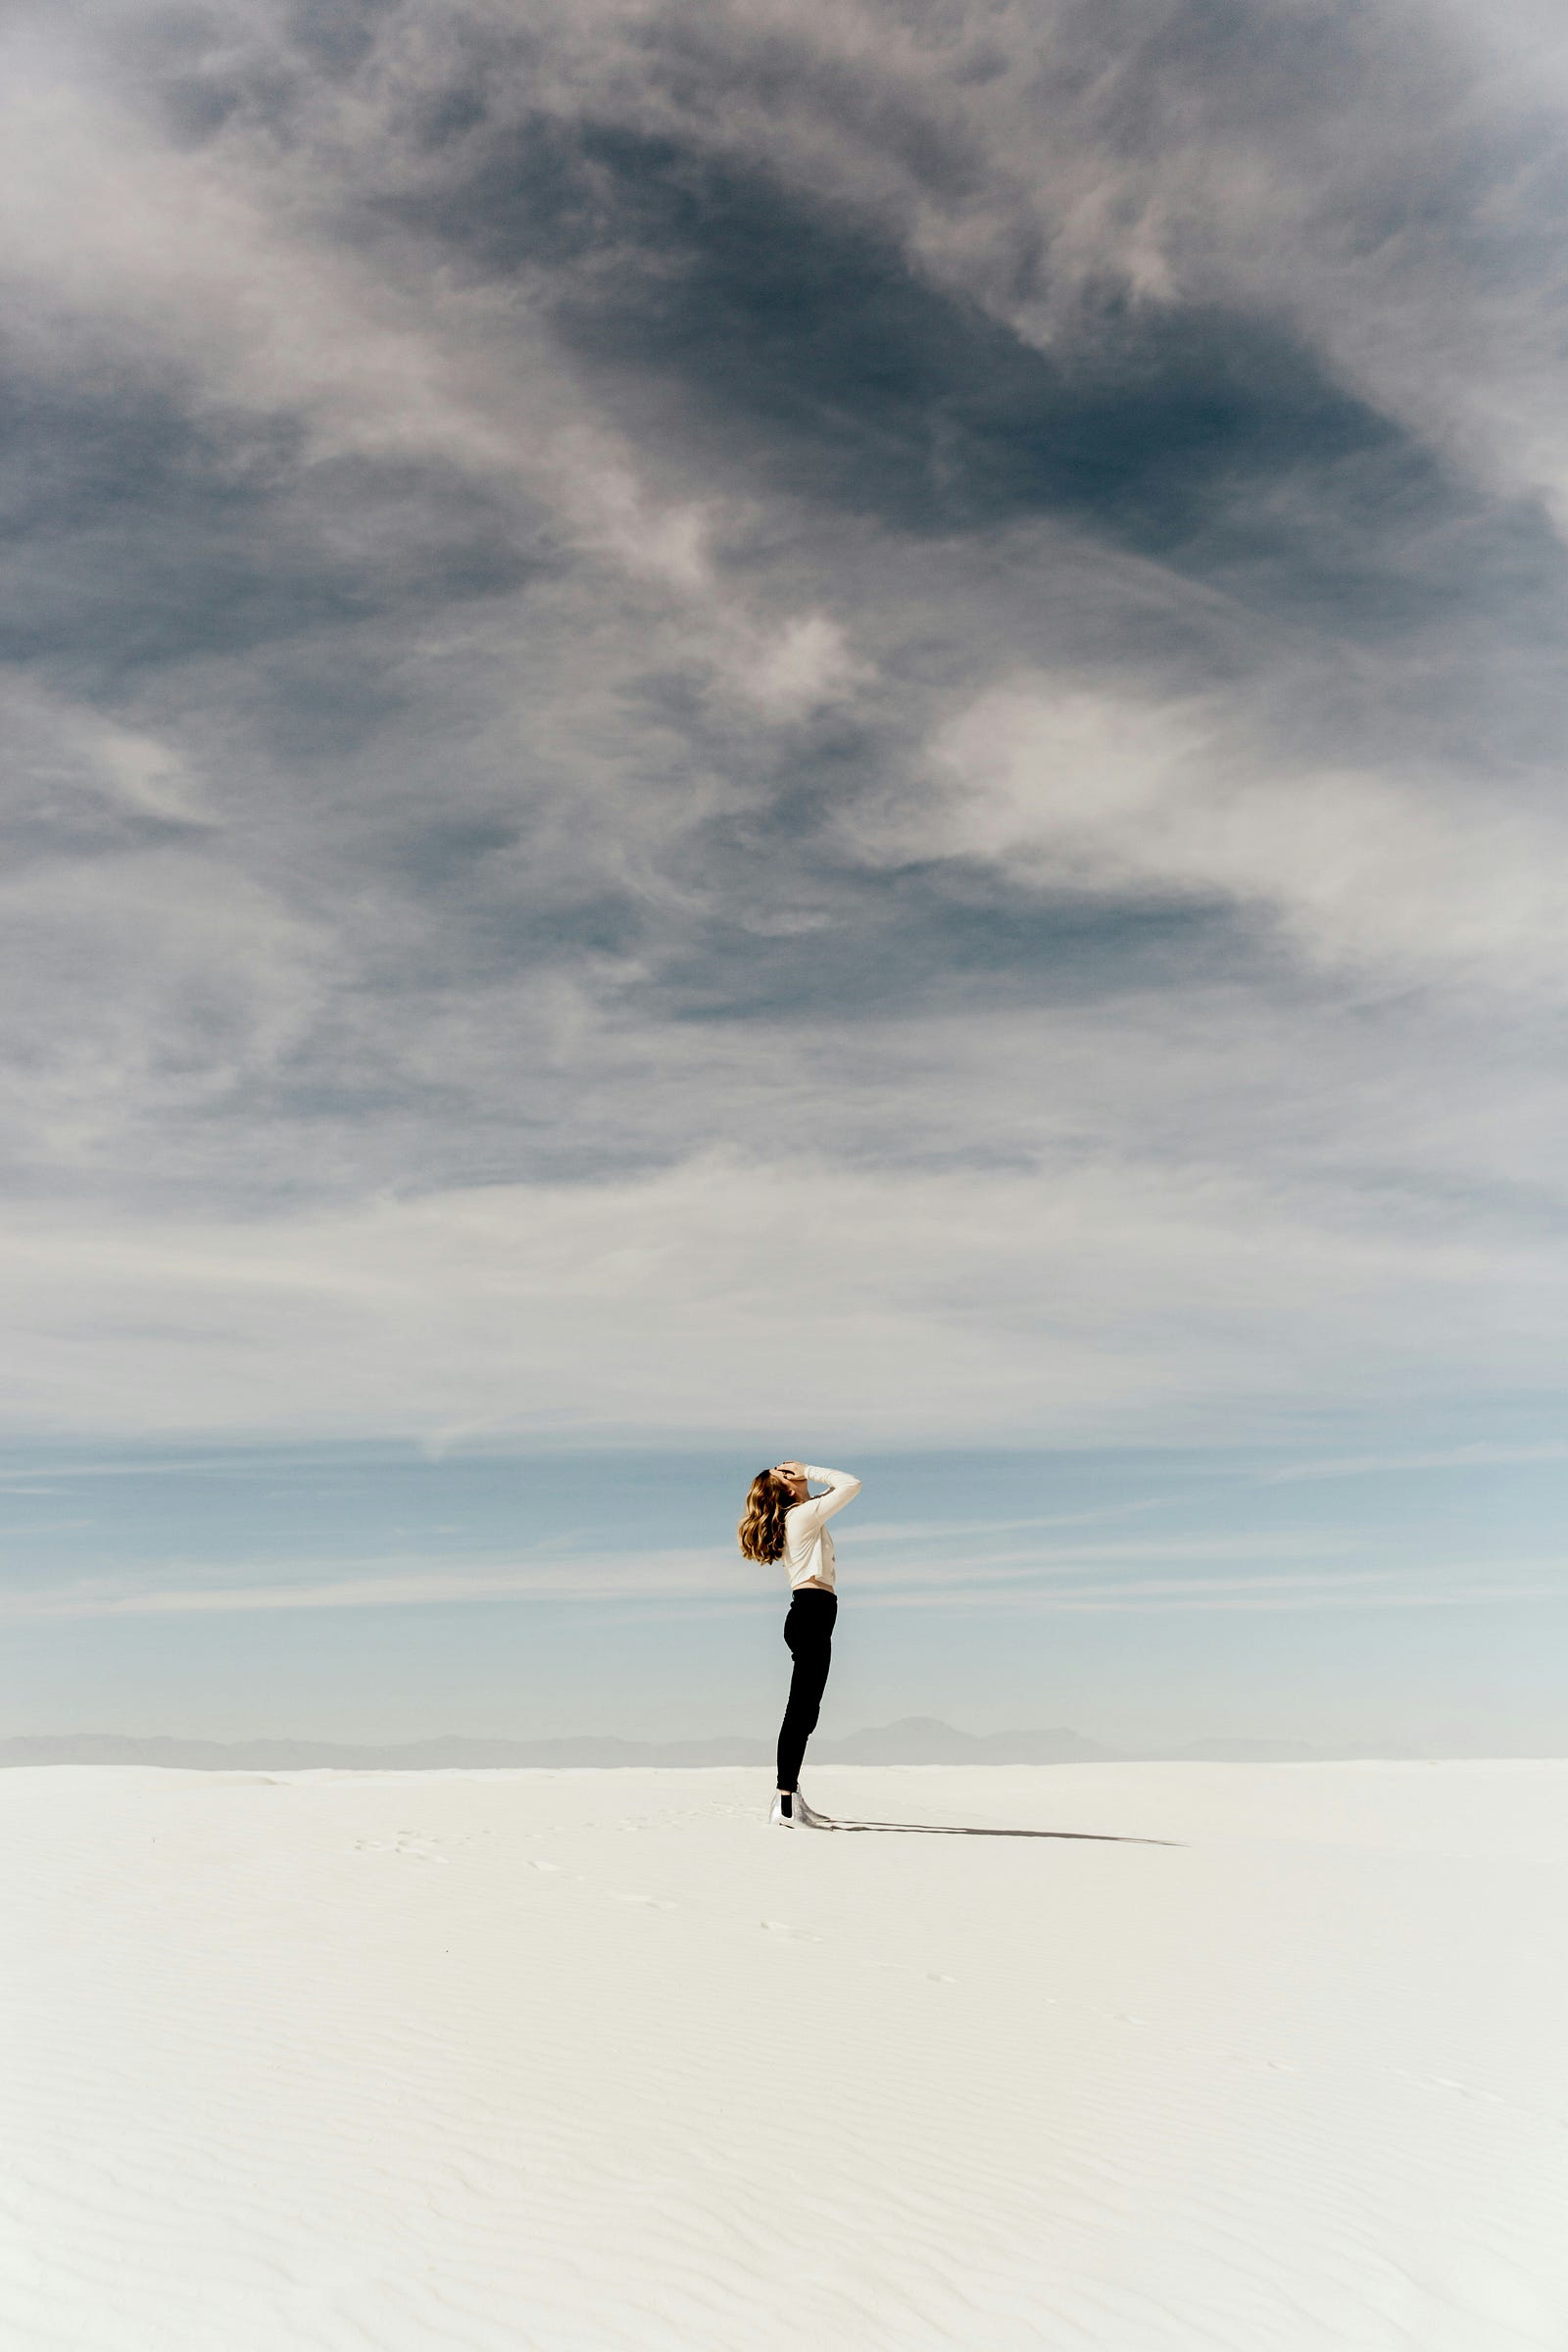 A young woman stands in profile against an open background that includes a sky filled with wispy cirrhus clouds.